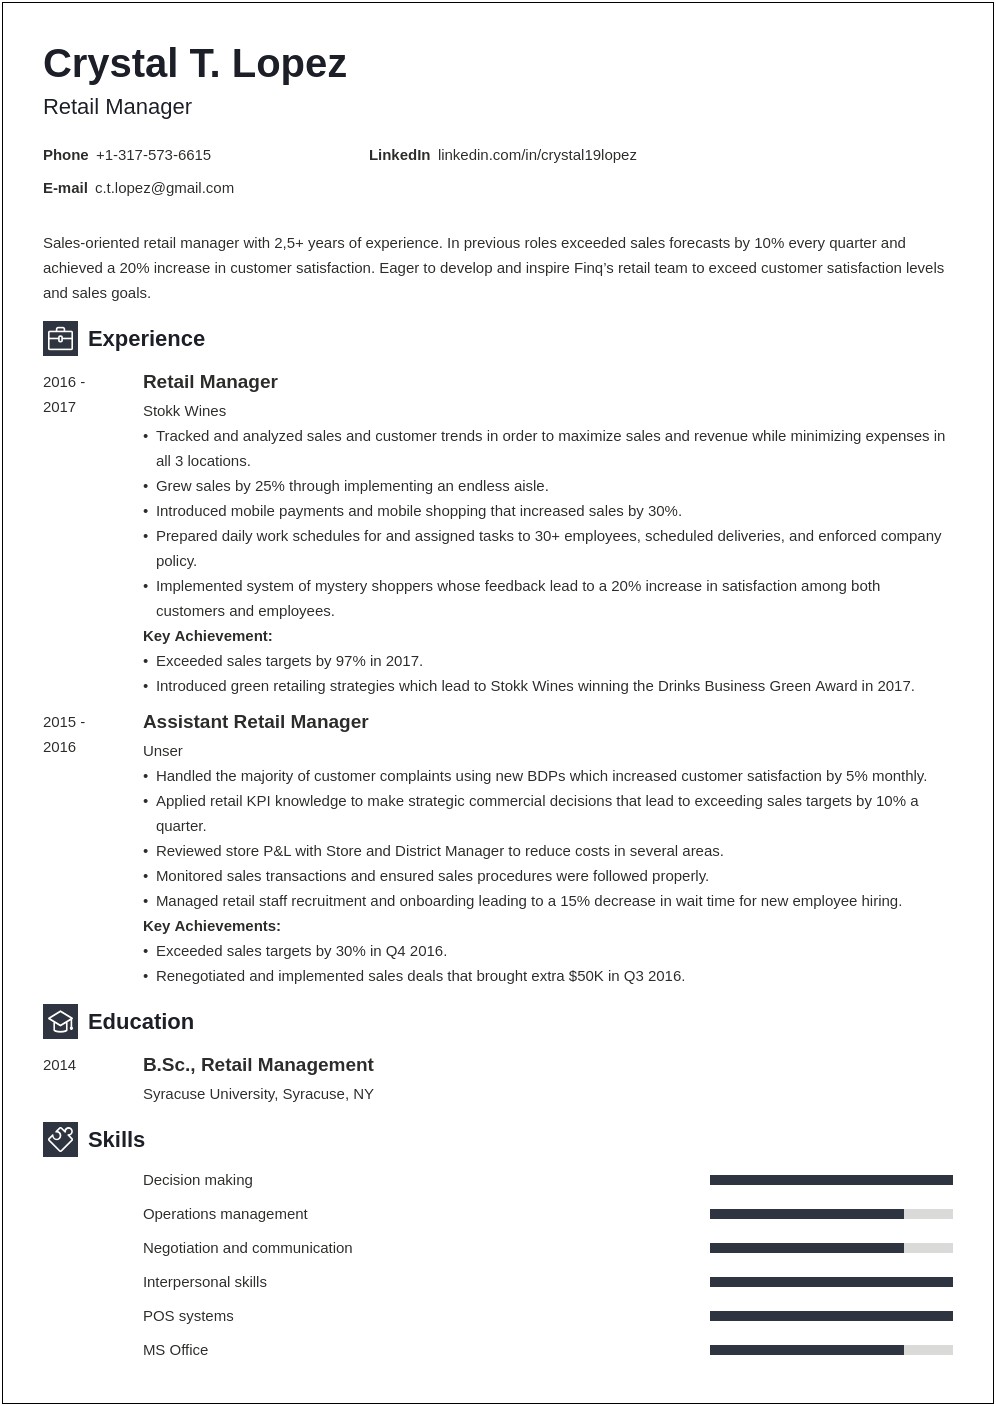 Recruiters Look For In Managers Resume